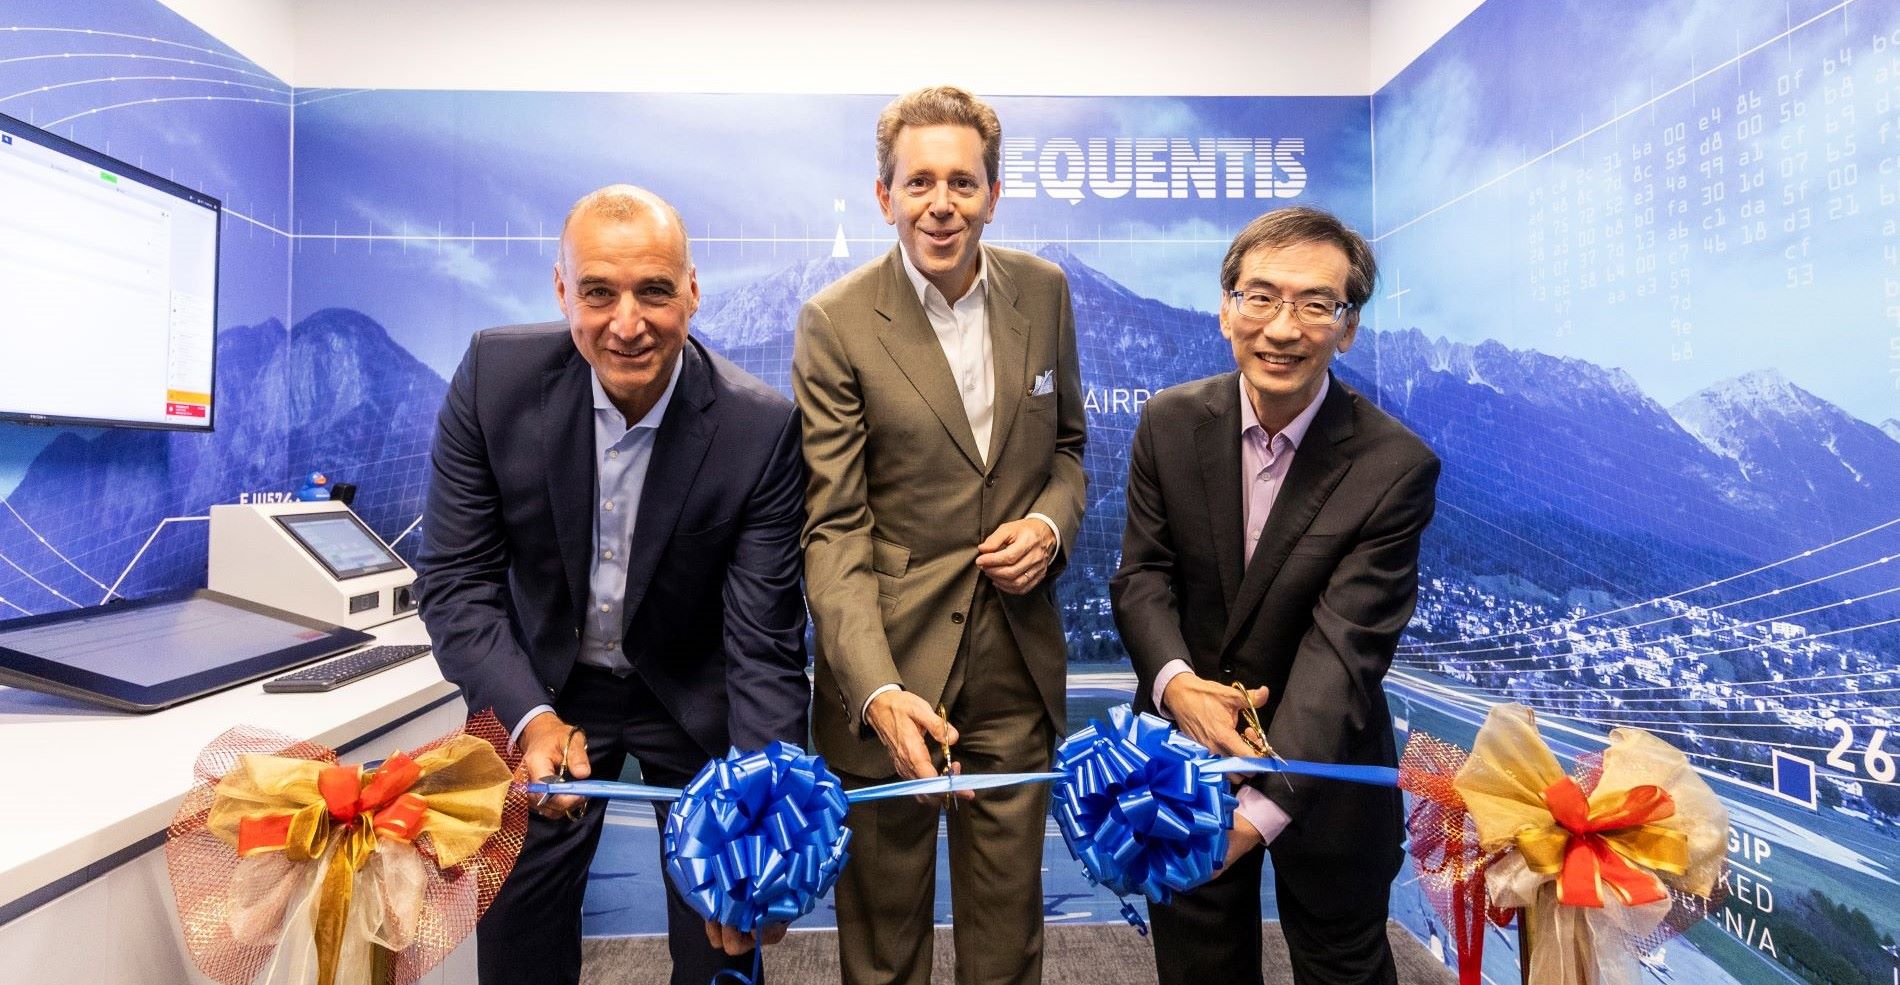 FREQUENTIS expands presence in Asia with new Singapore OfficeFREQUENTIS expands presence in Asia with new Singapore Office